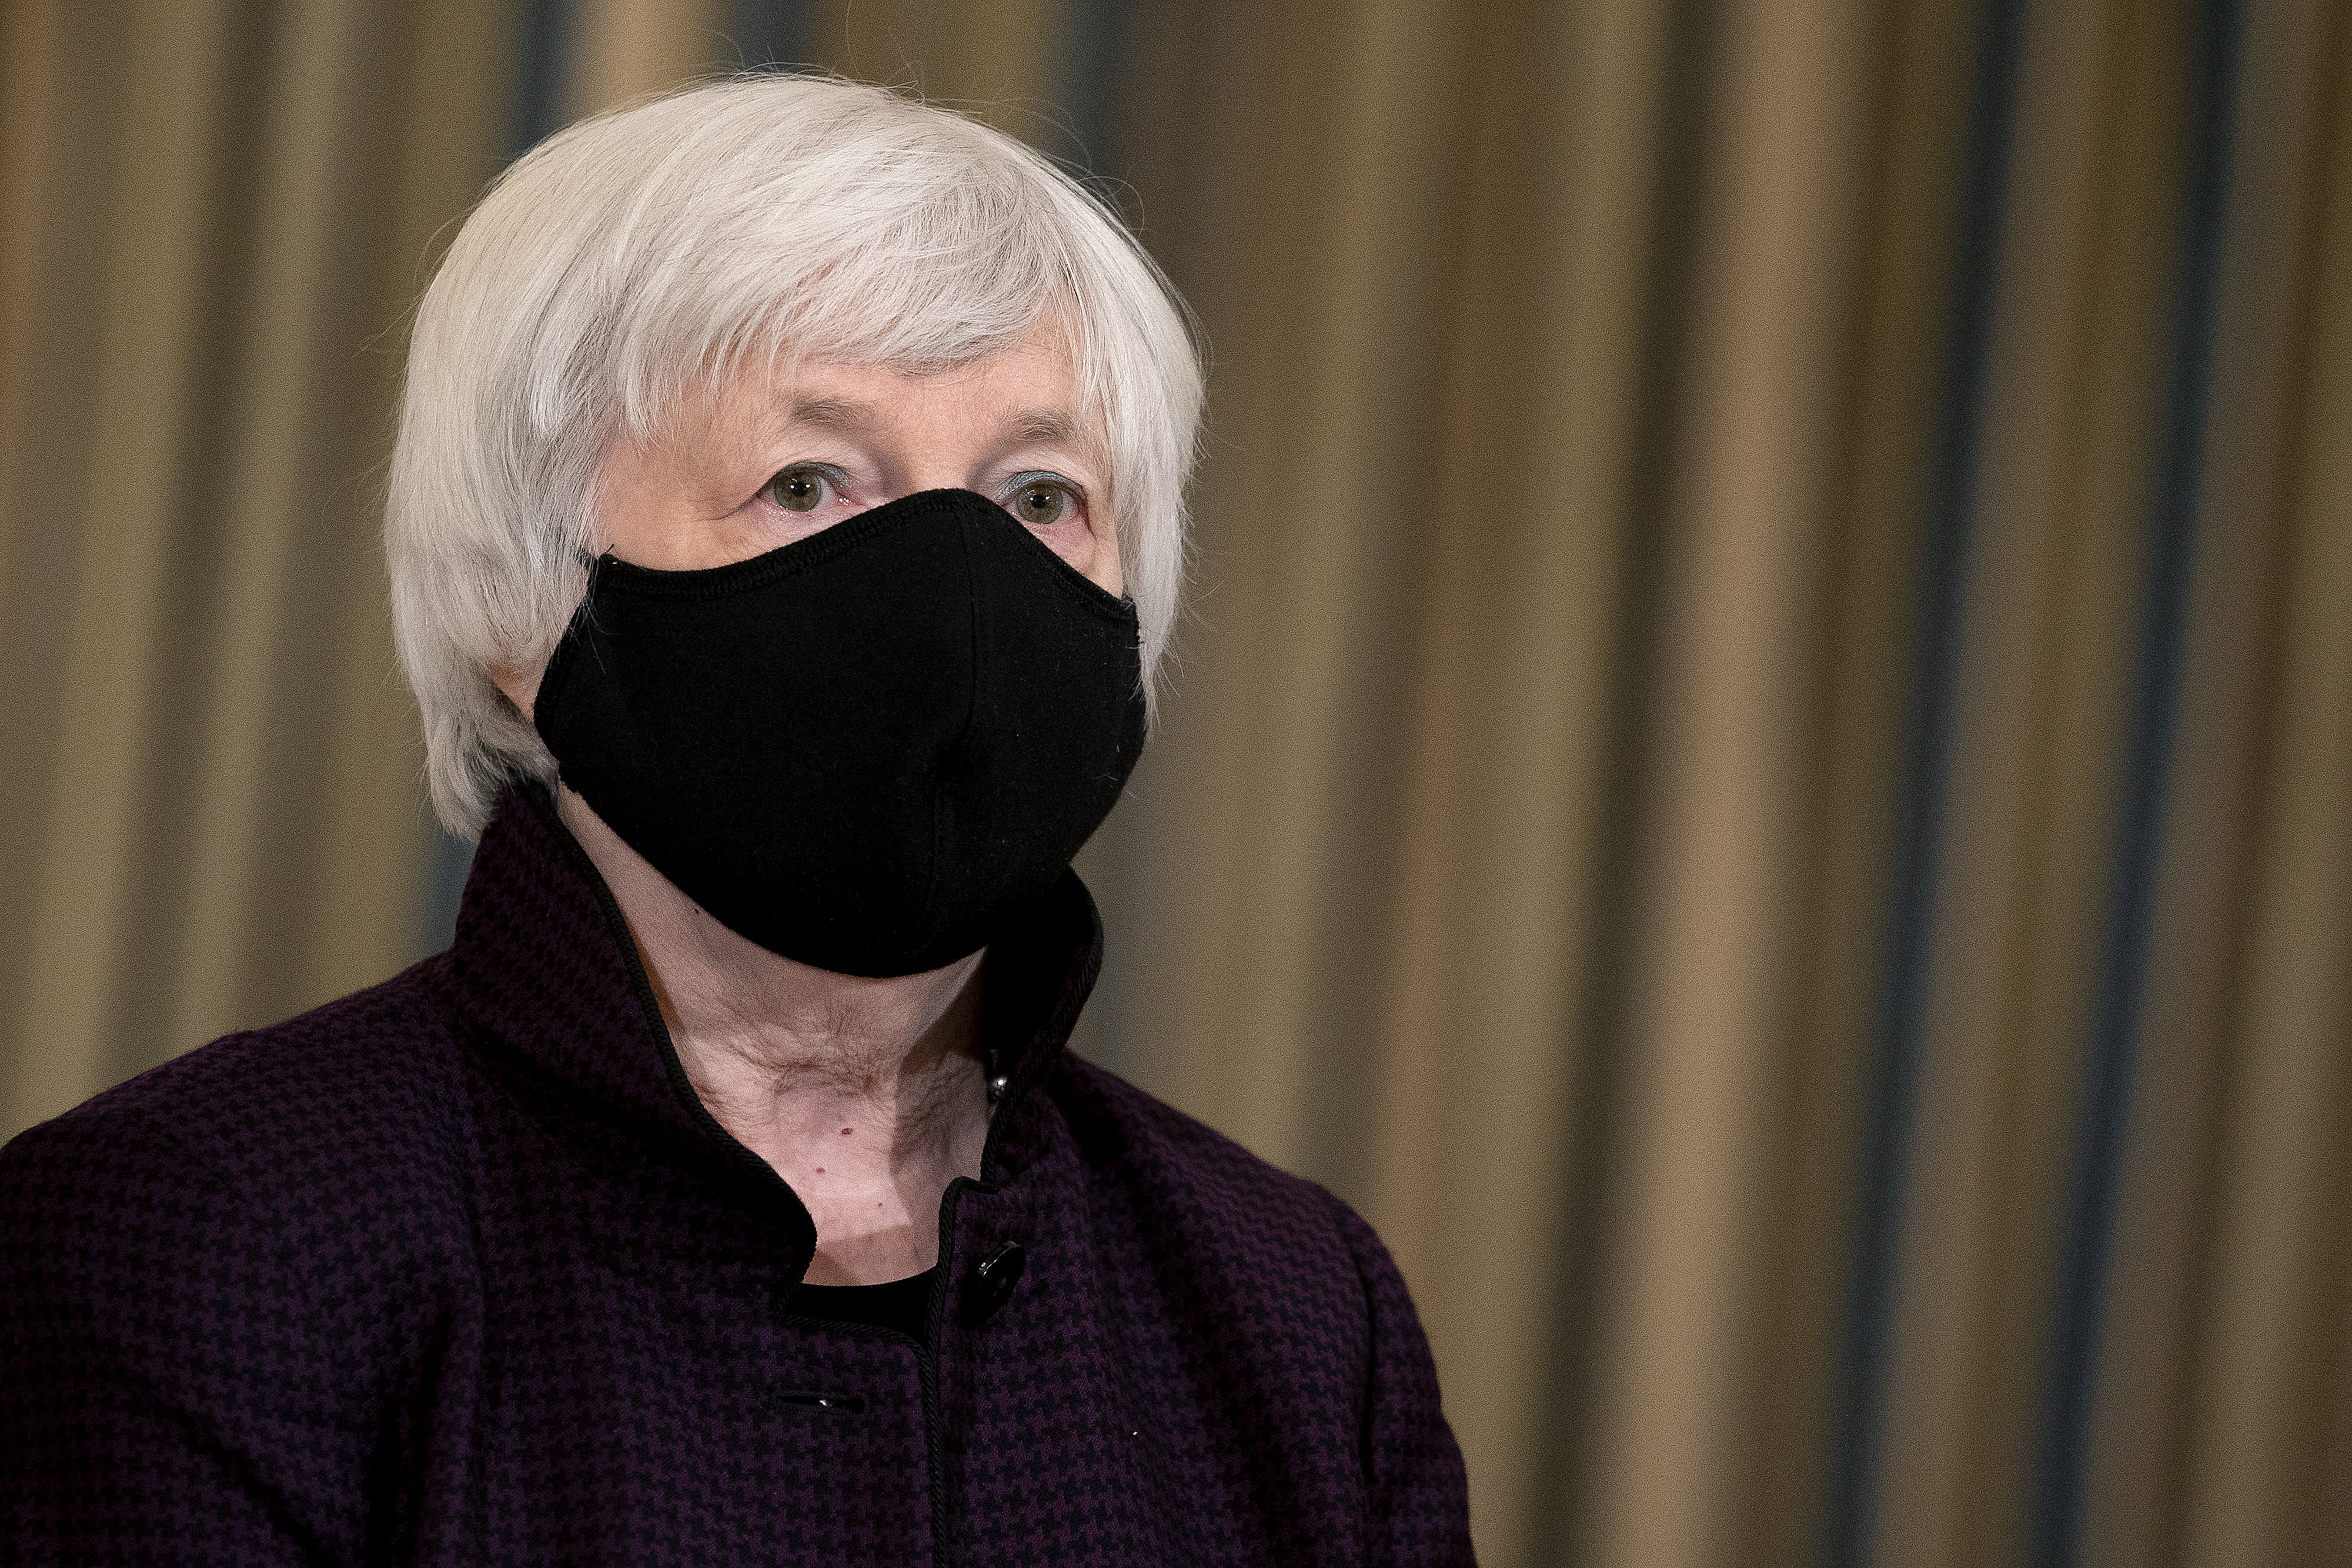 Yellen’s speech confirms that the United States has returned to the world stage